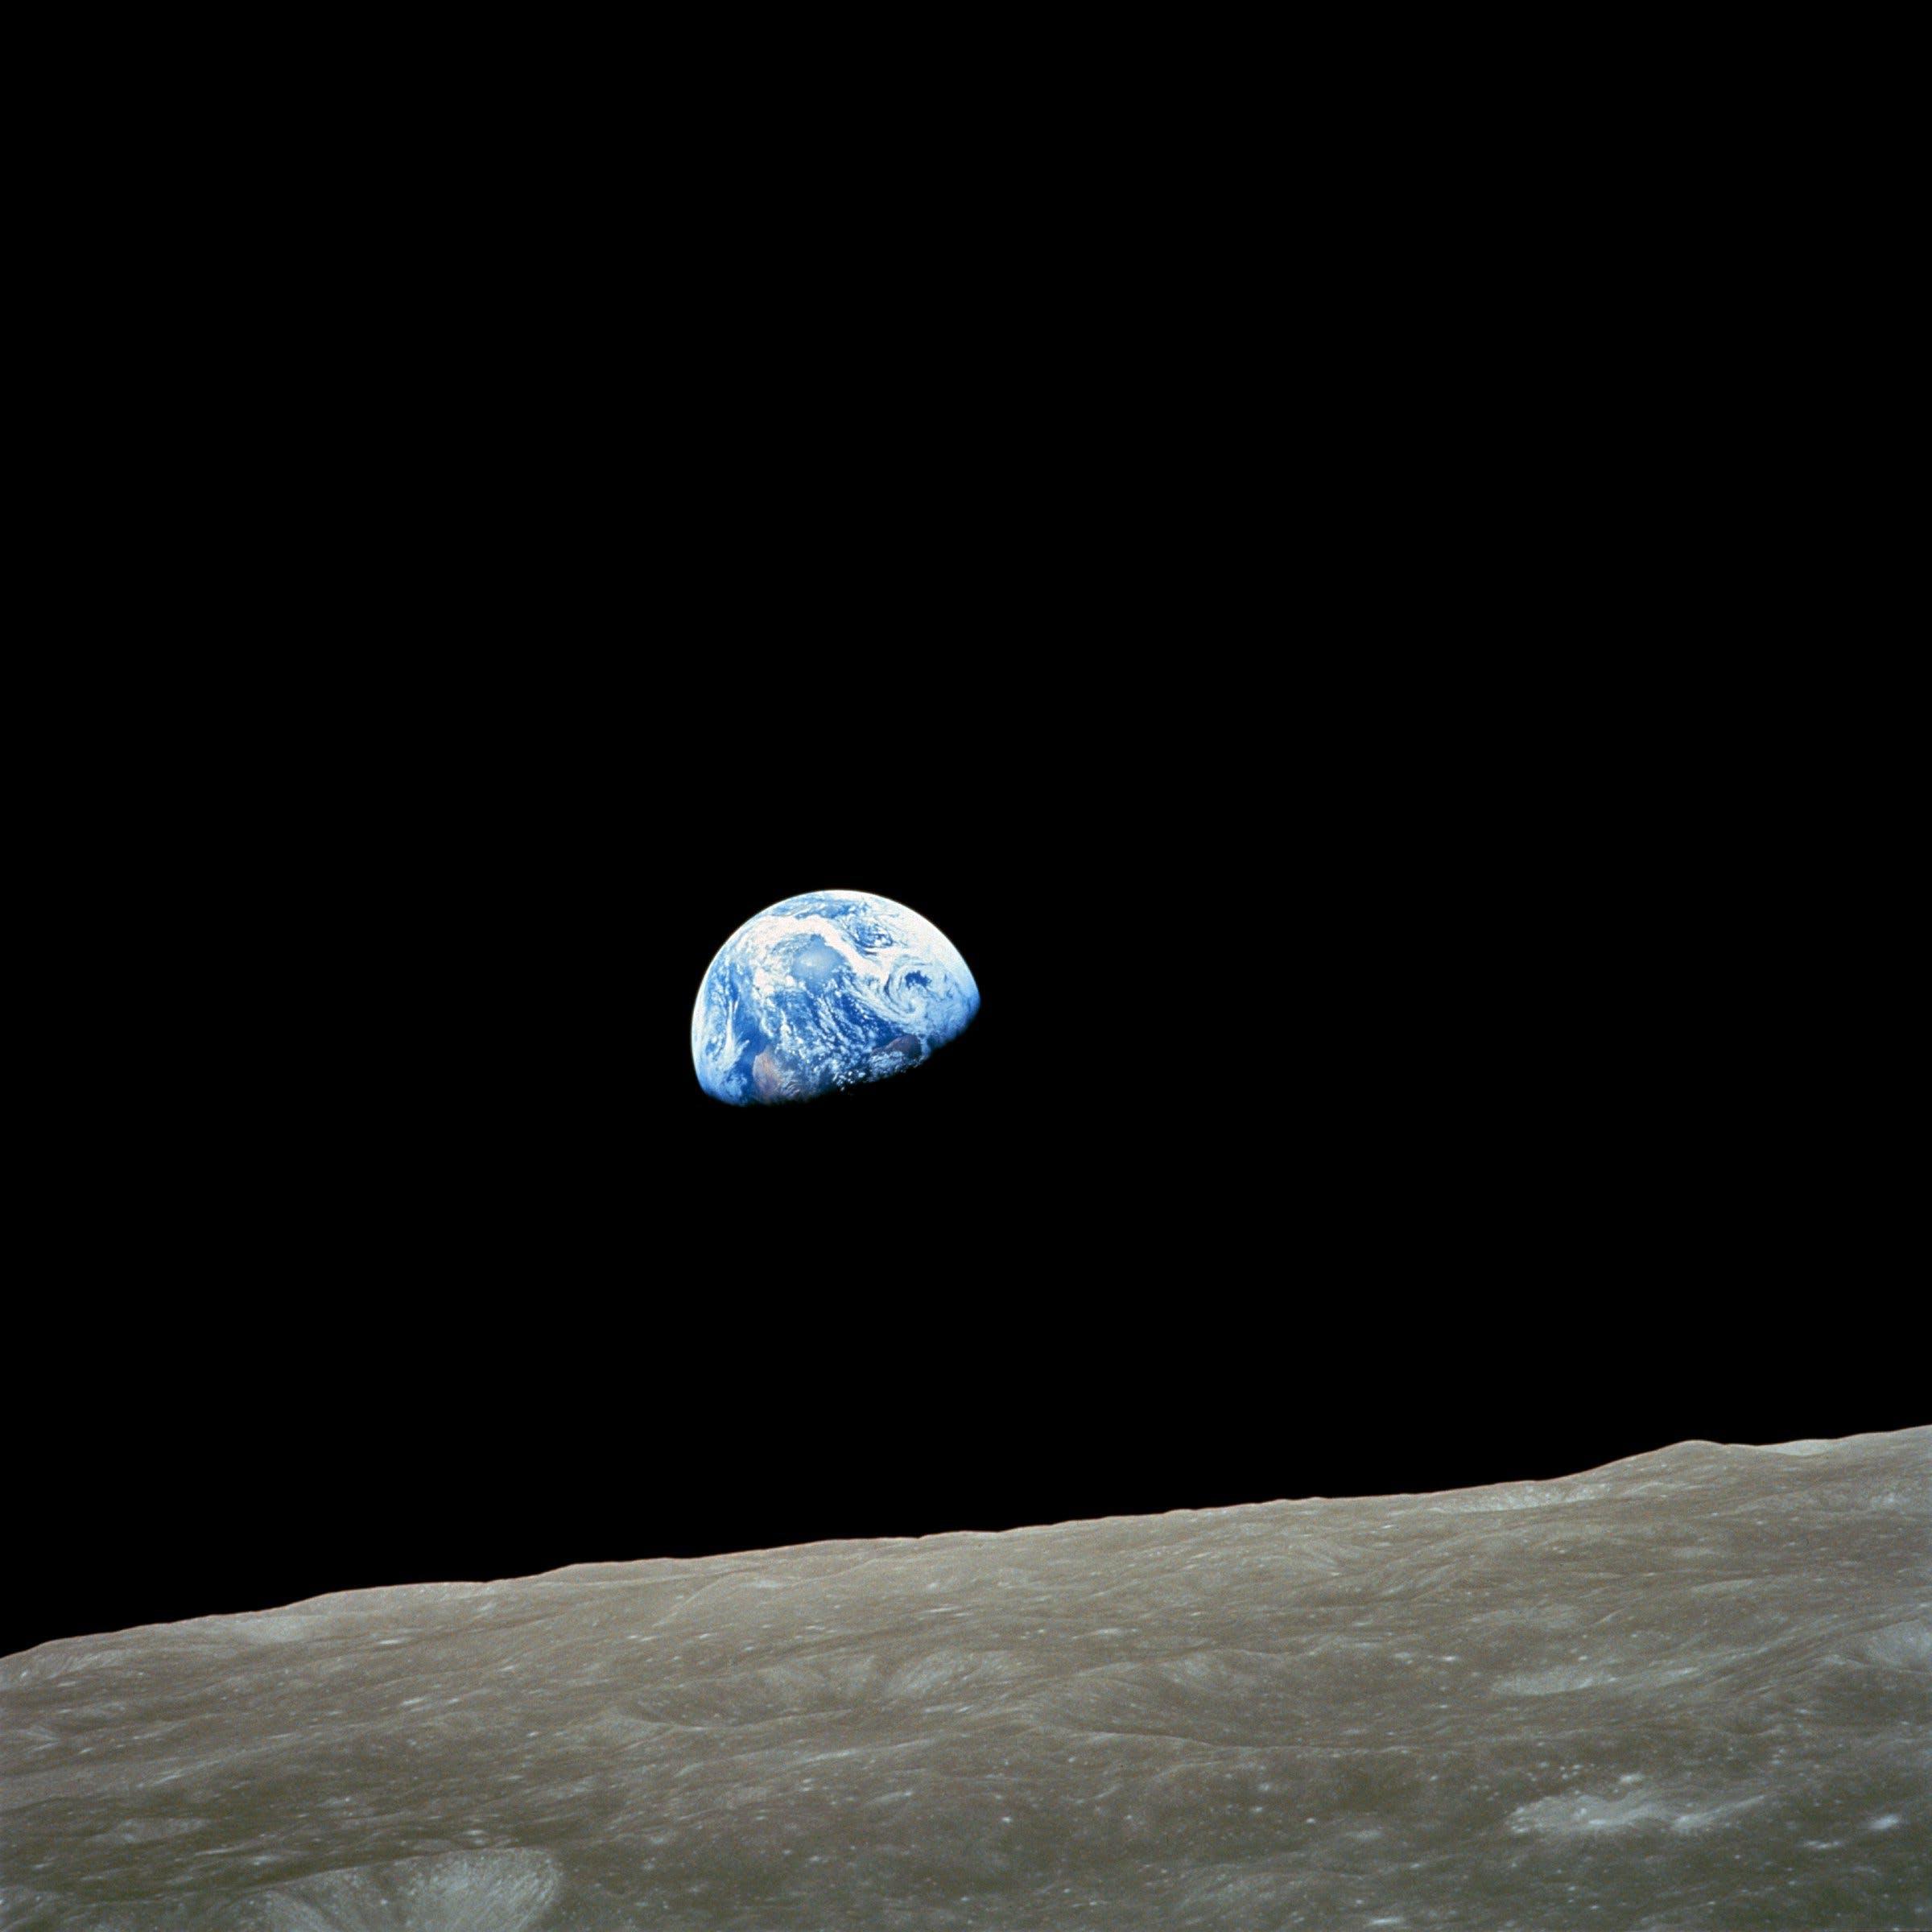 A photo of Earth taken from the Moon